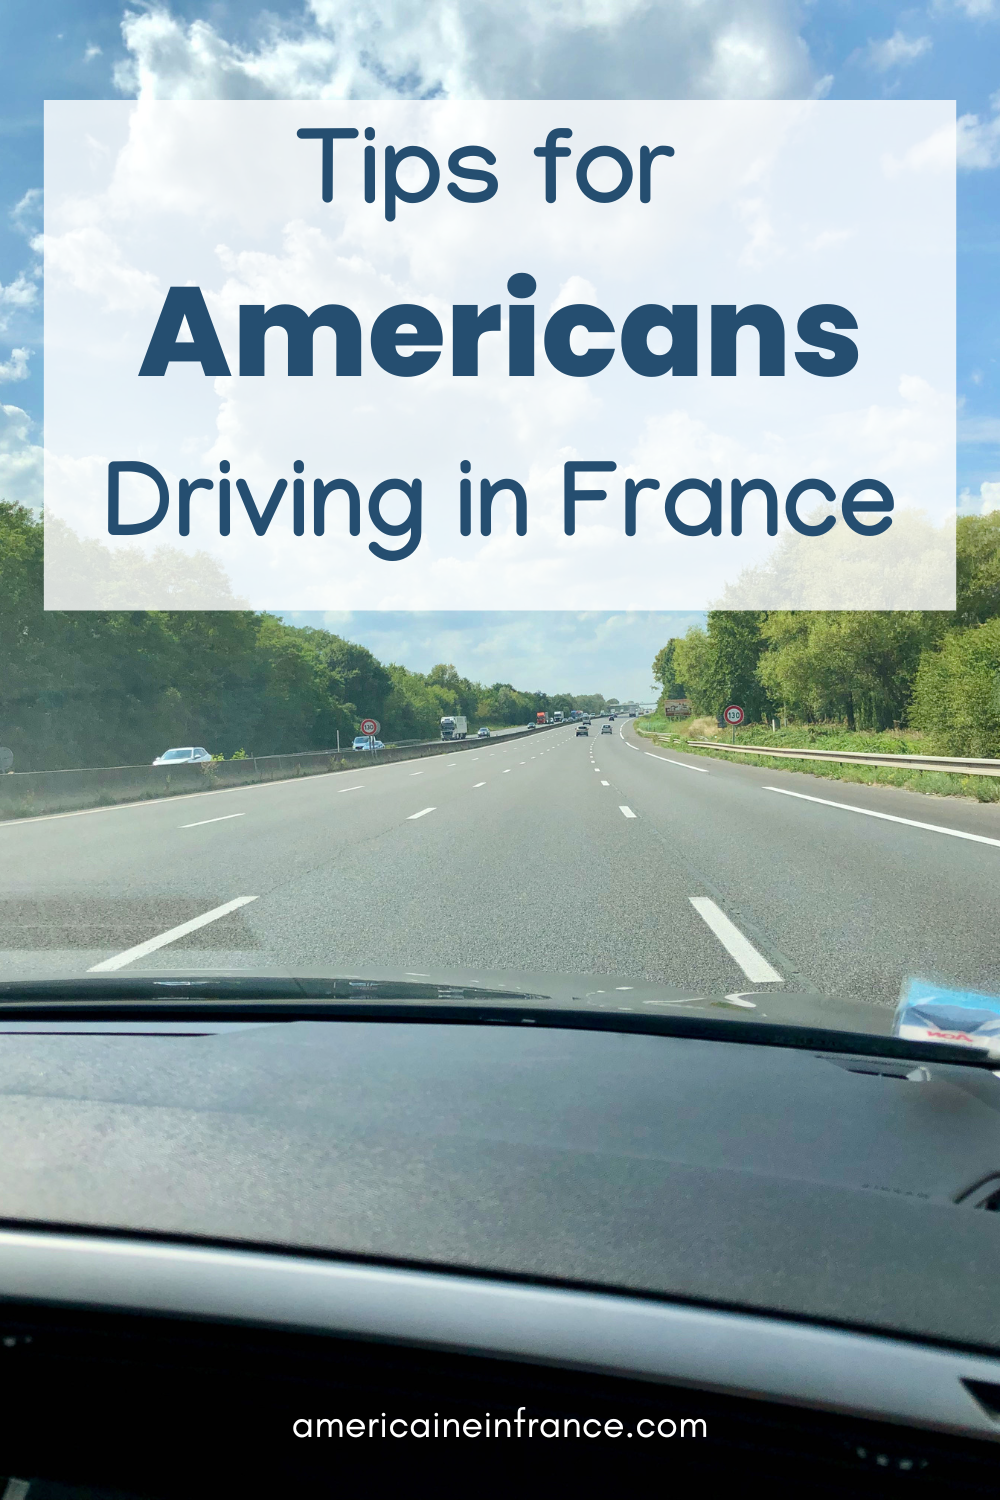 Tips for Americans Driving in France